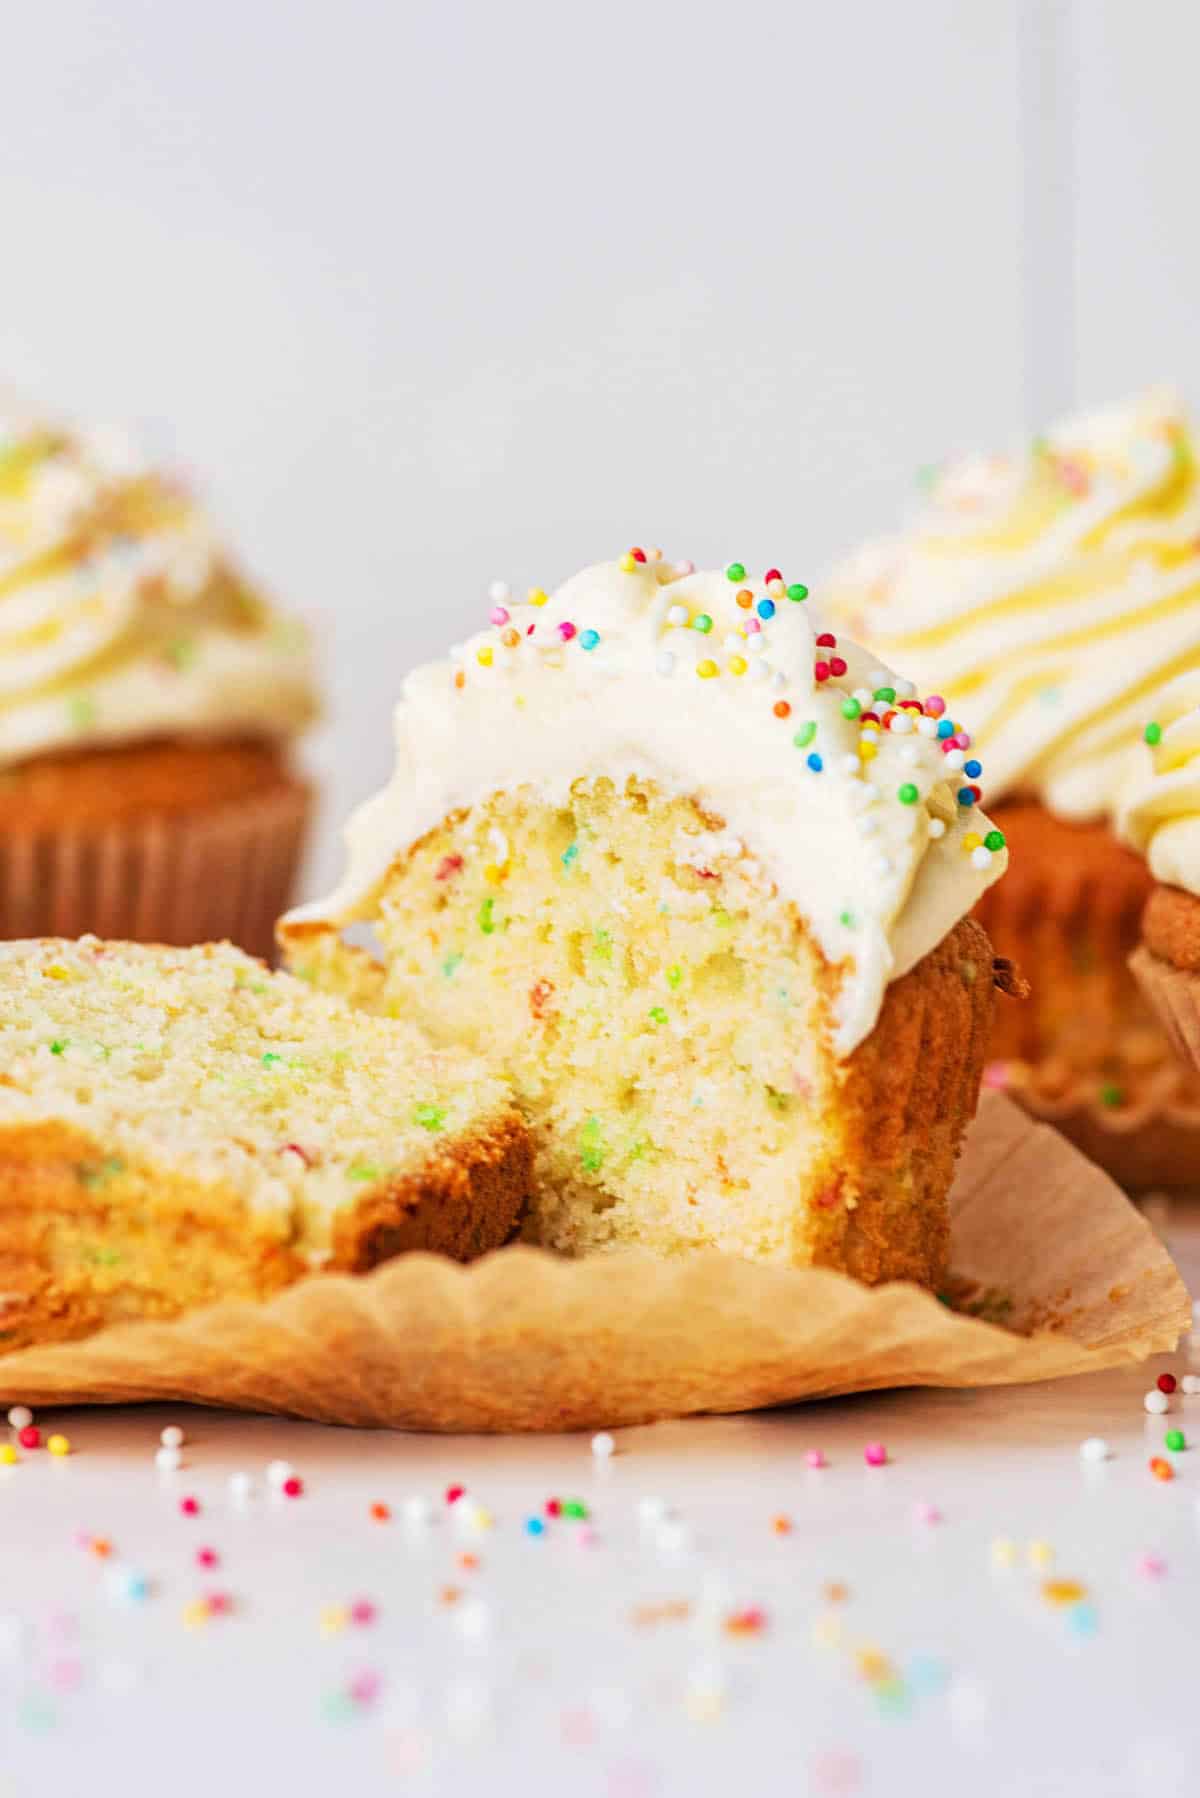 Sprinkle cupcake topped with buttercream, halved to show interior texture and sprinkles.